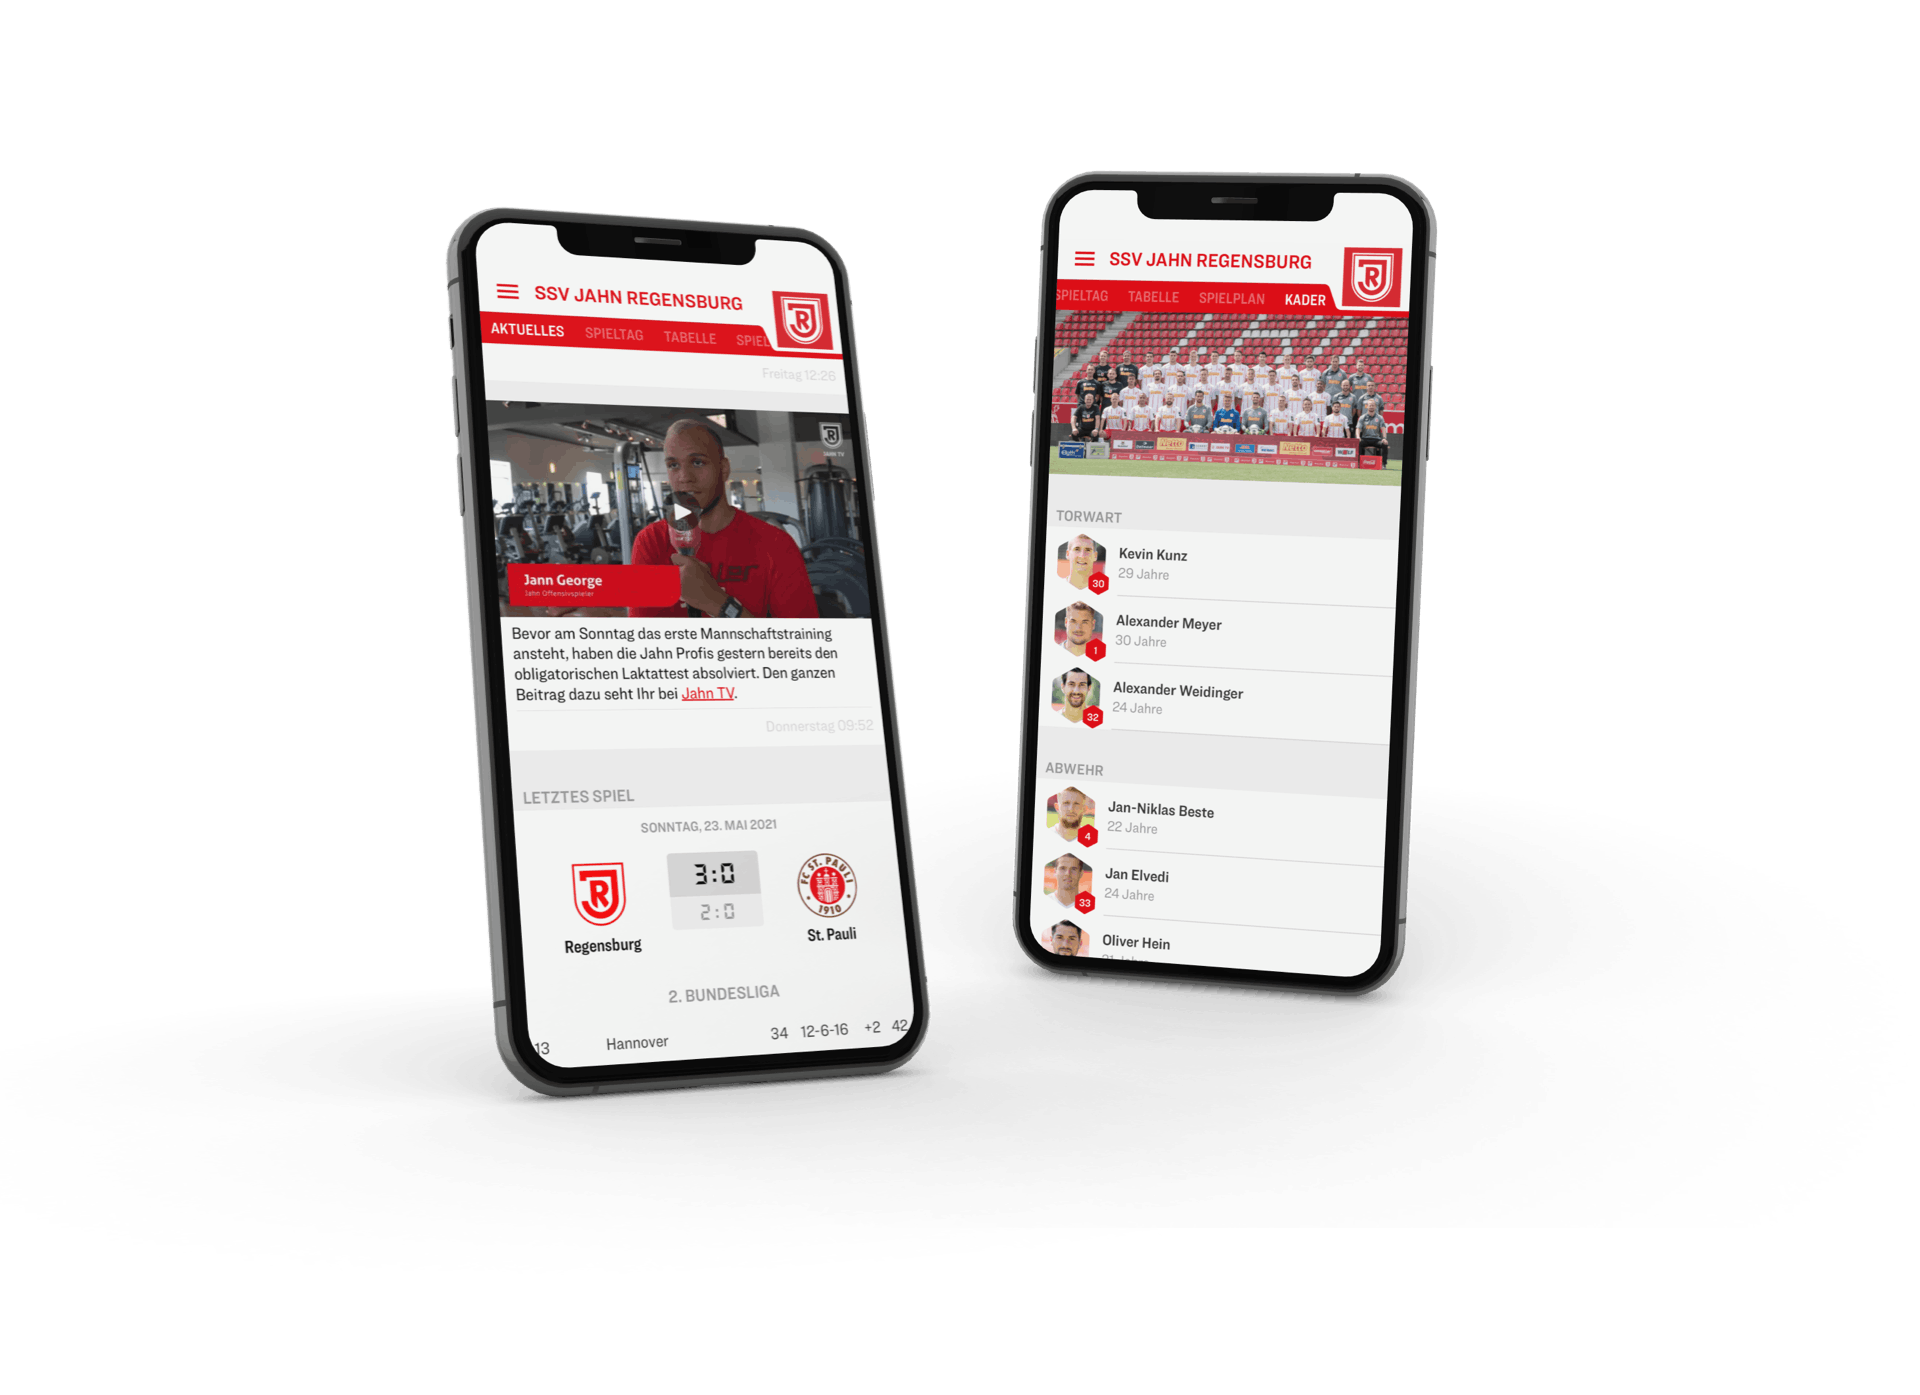 With the SSV Jahn Mobile App, users can see team news and live game updates (as seen on the mobile phone on the left) and rosters (as seen in the mobile phone on the right). 